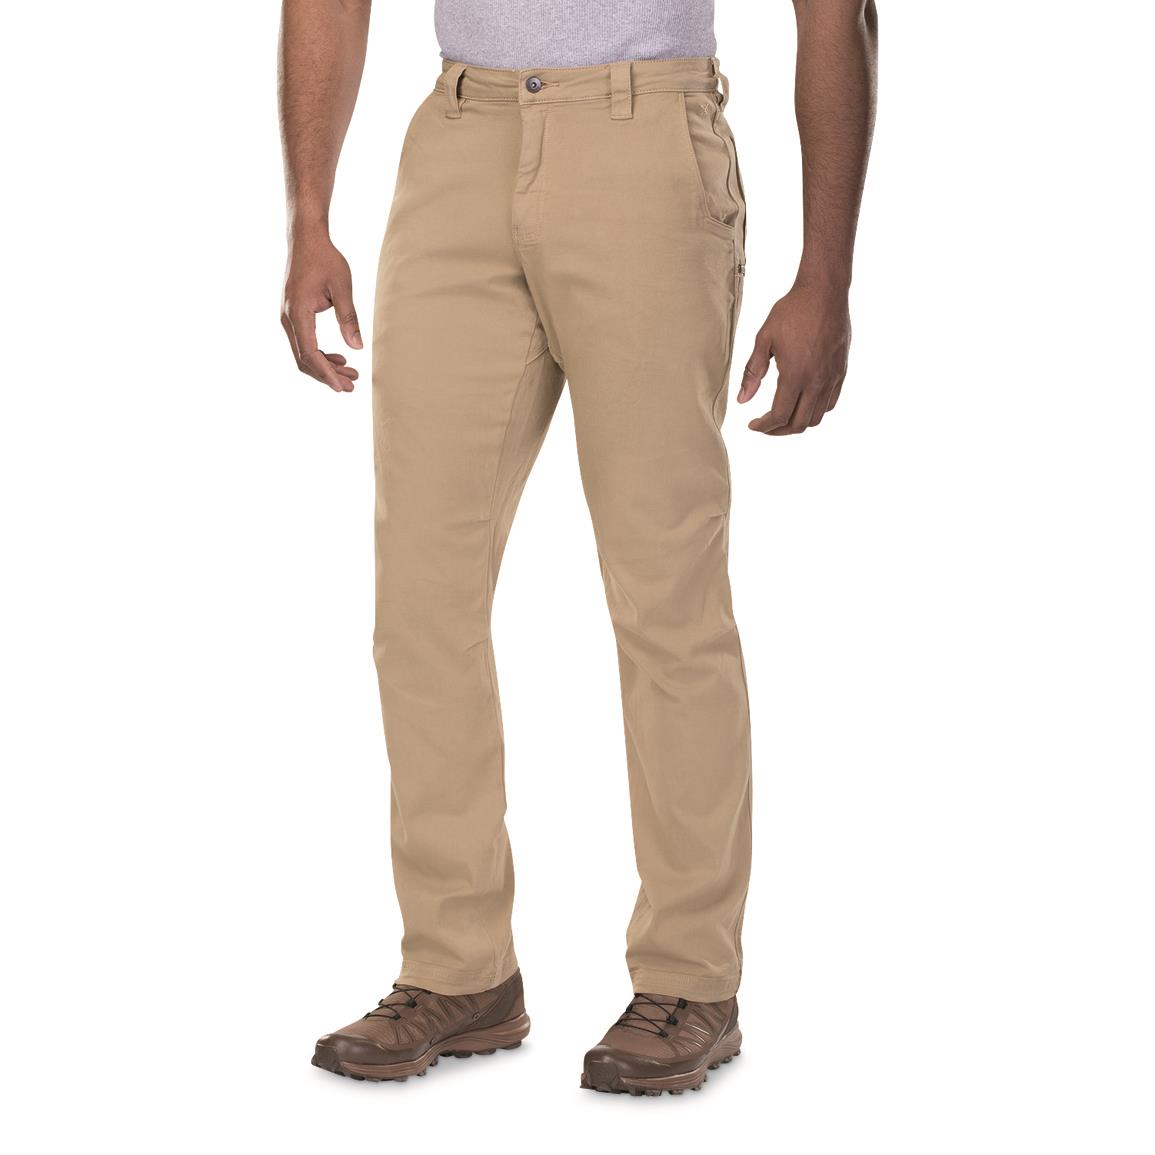 MORUANCLE New Mens Casual Cargo Pants With Multi Pockets